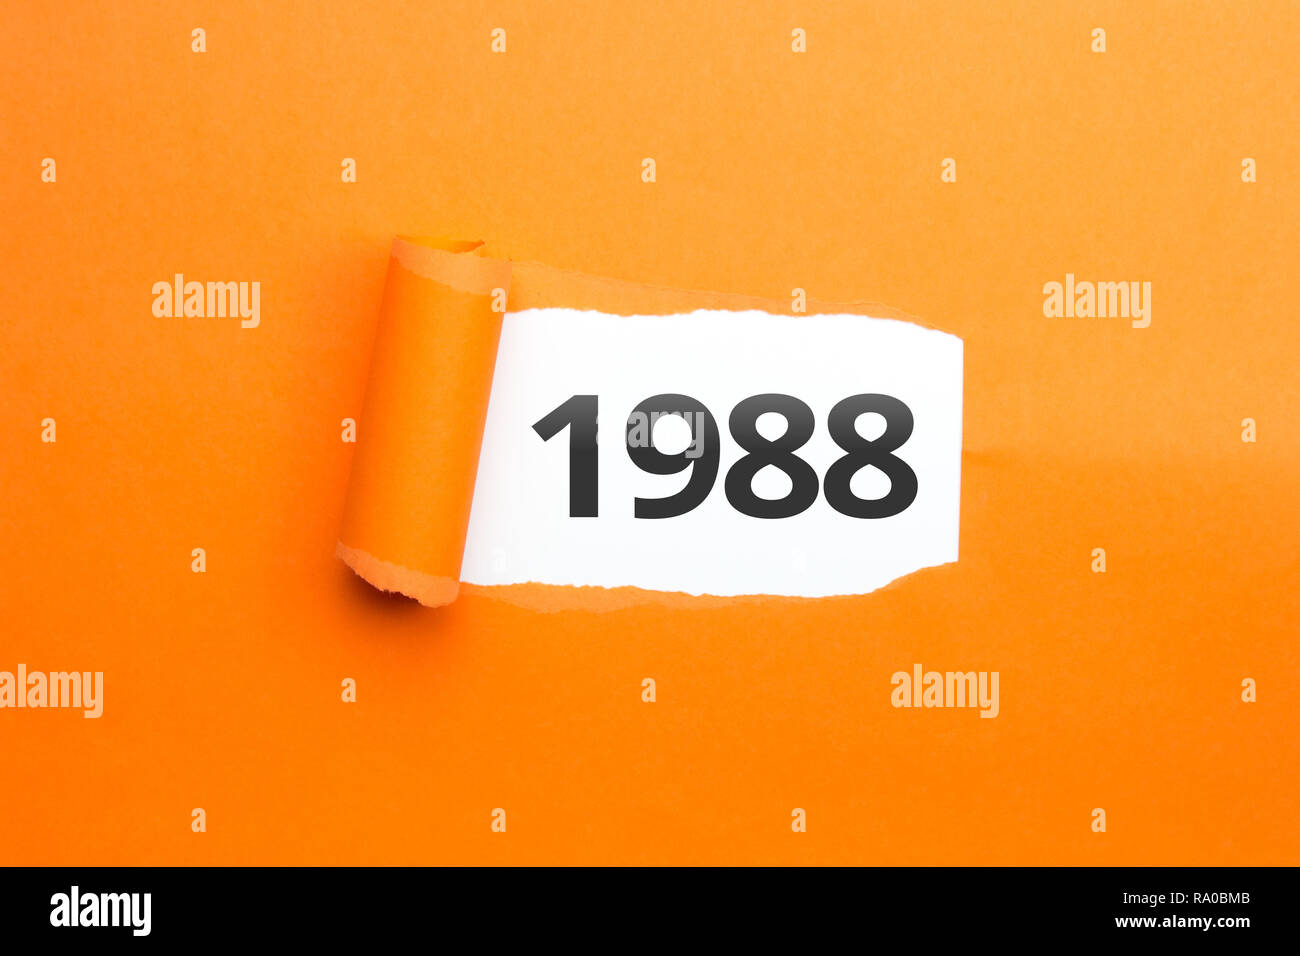 The Year 1988 High Resolution Stock Photography and Images Alamy